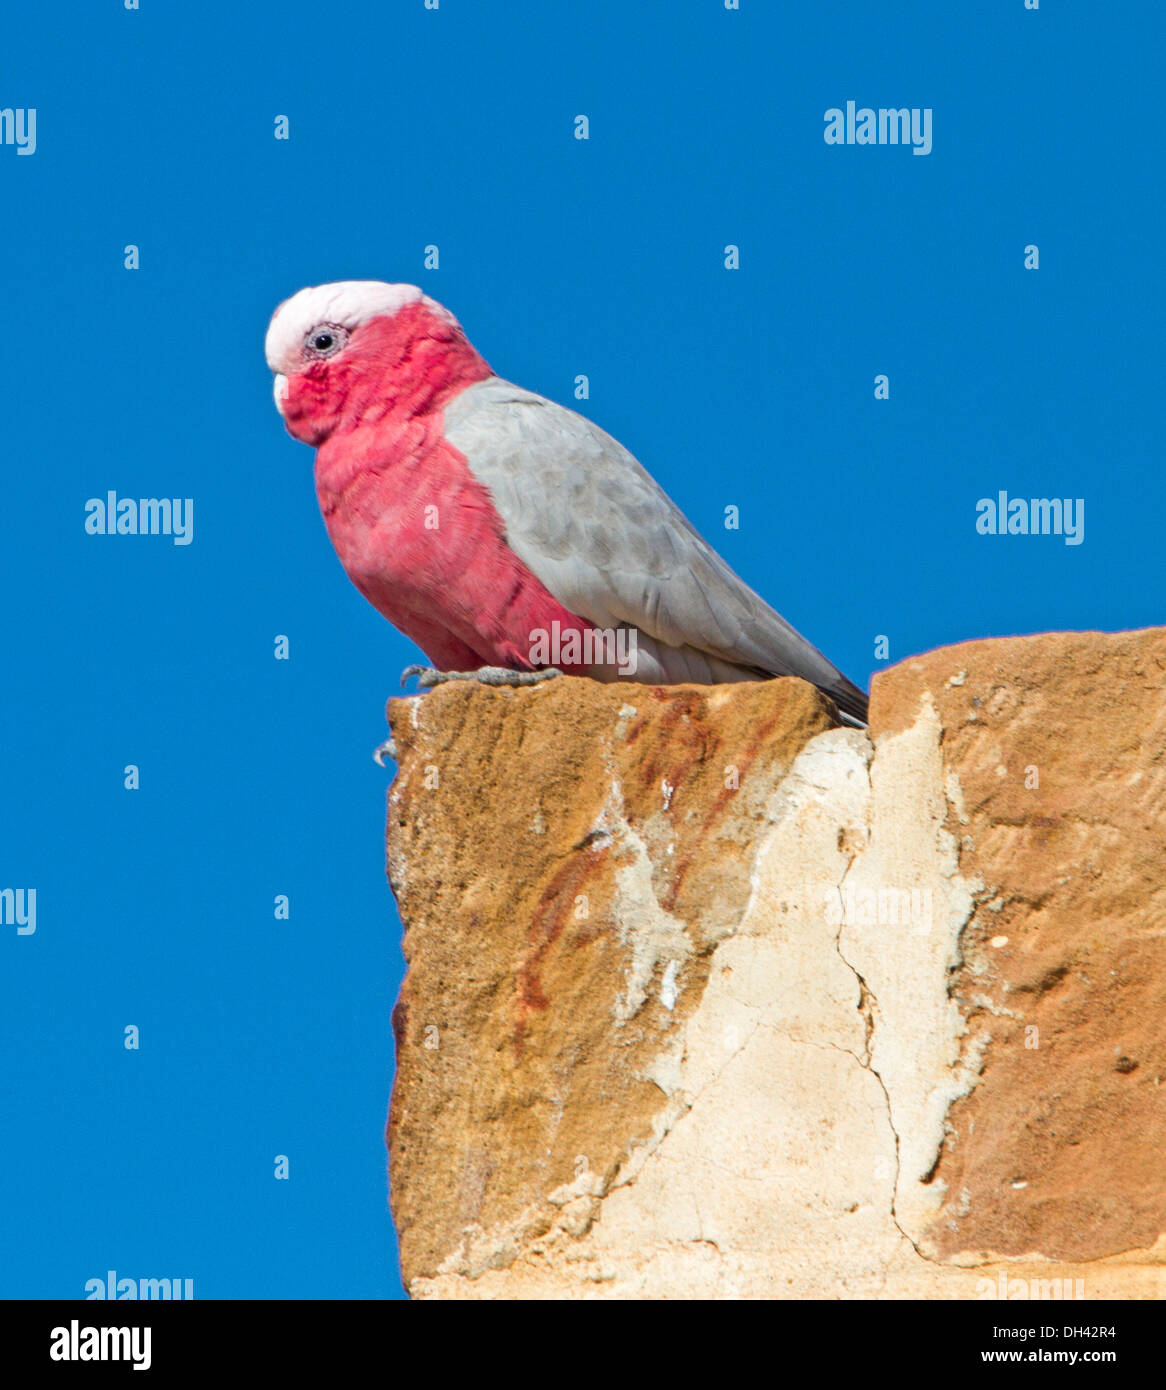 Galah, an attractive pink and grey Australian cockatoo, in the wild against blue sky on stone chimney in outback northern SA Stock Photo